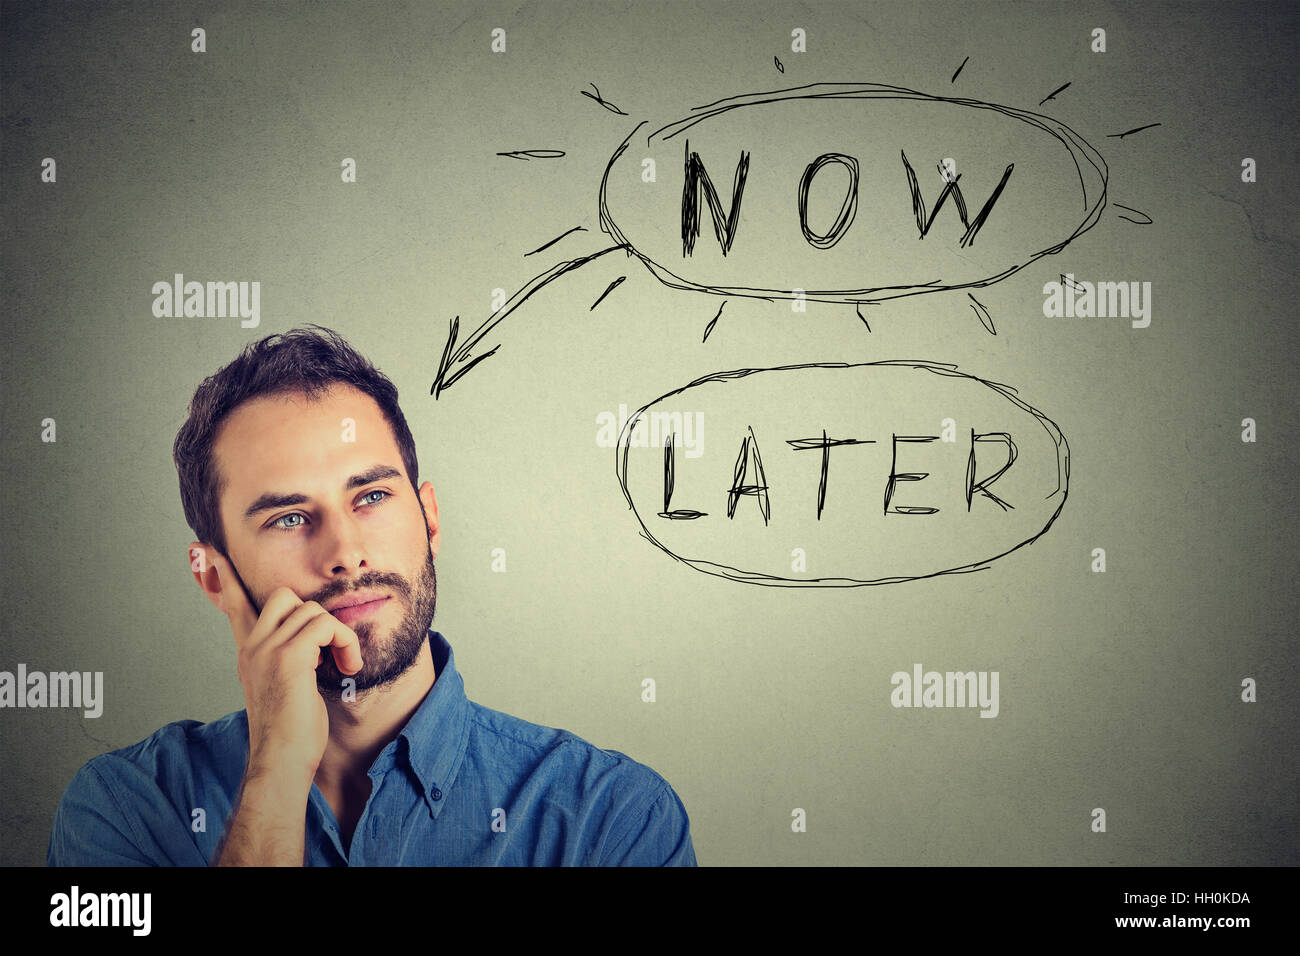 Now or later. Man thinking looking up isolated on gray wall background. Human face expression Stock Photo